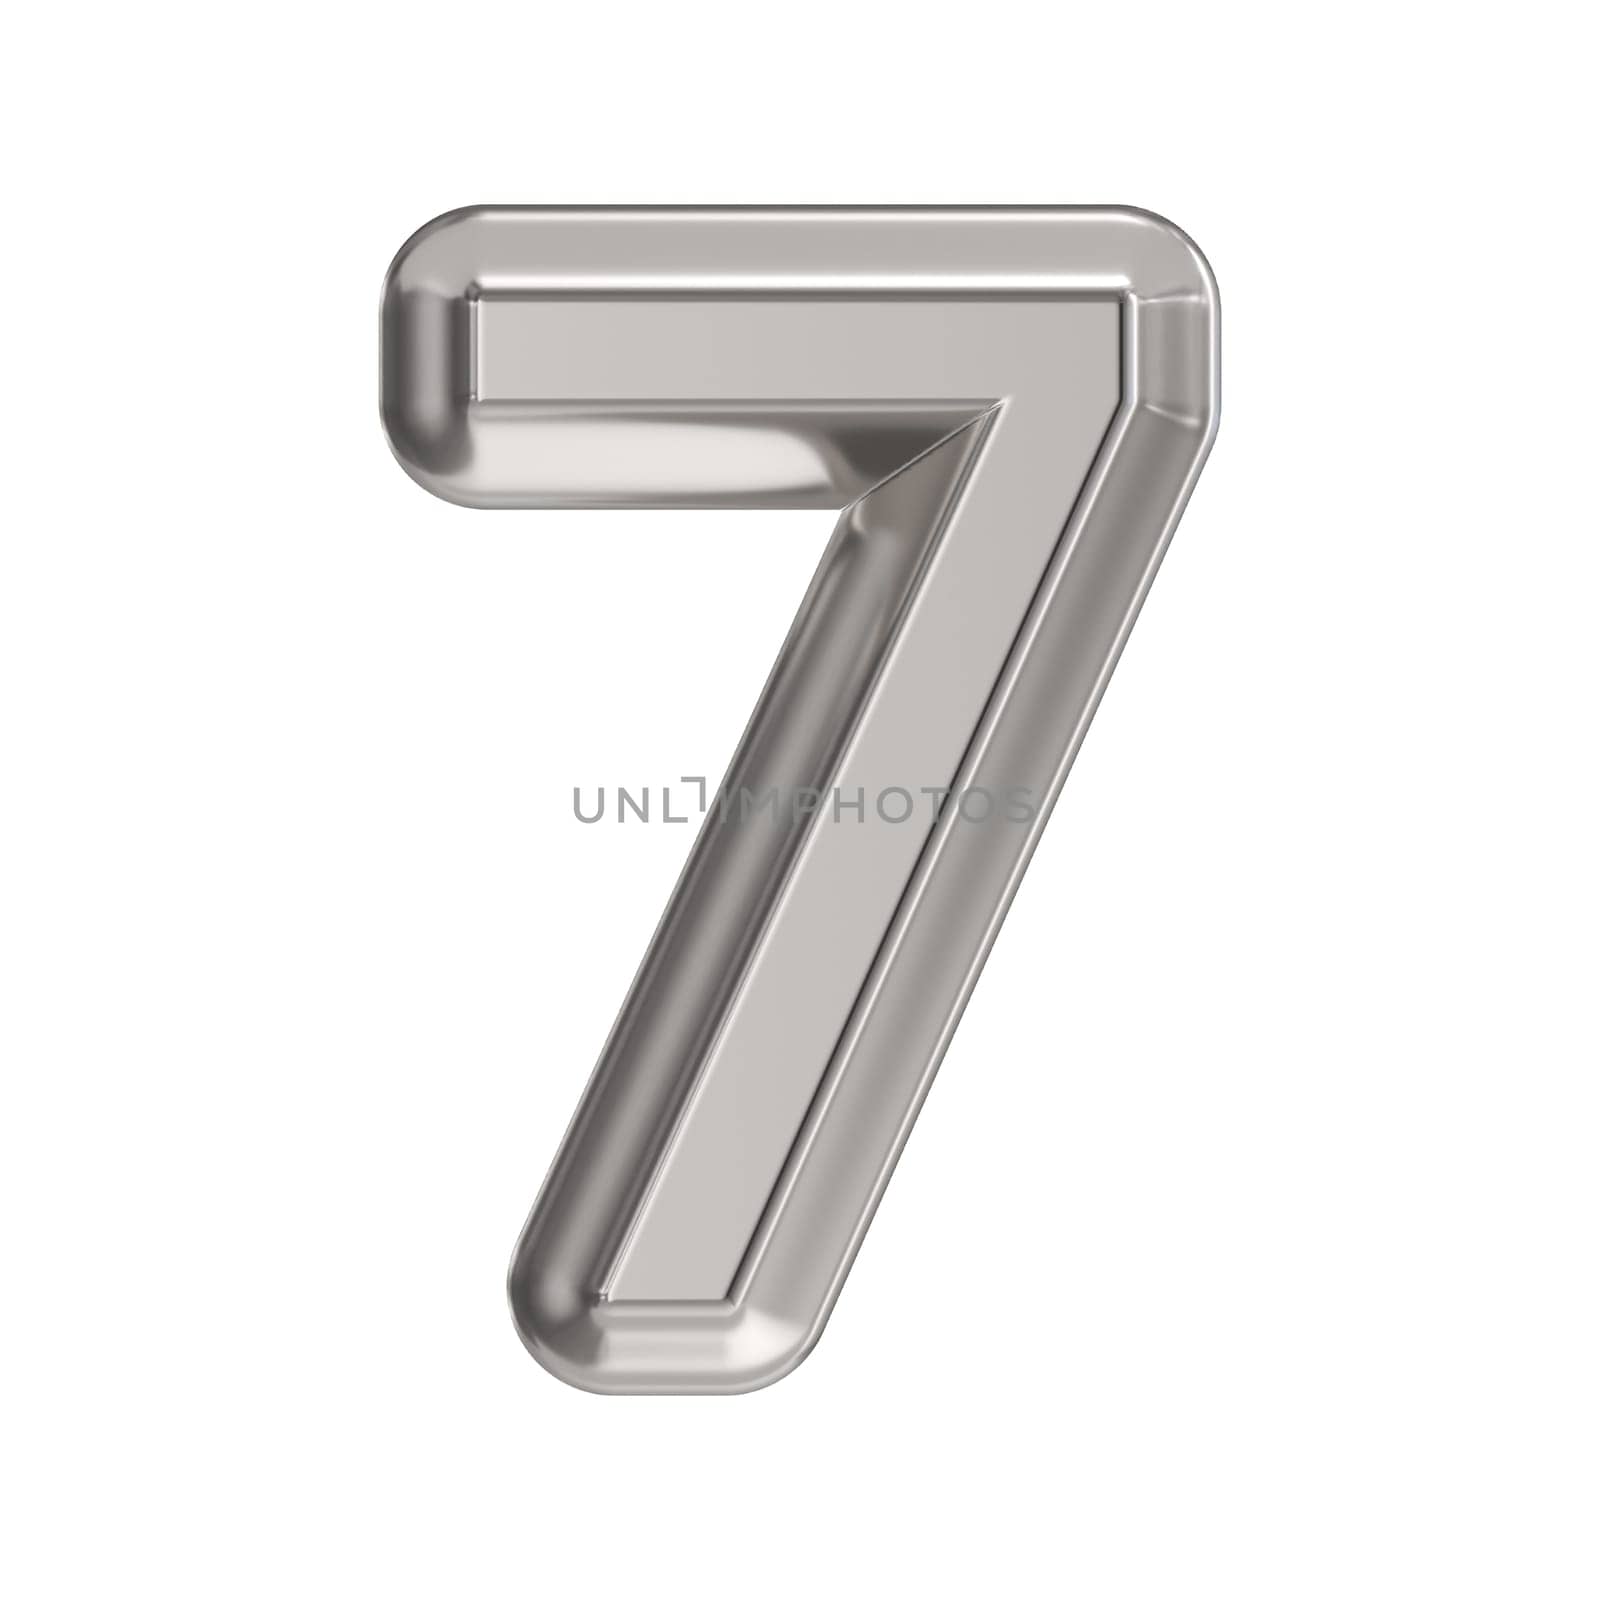 Steel font Number 7 SEVEN 3D rendering illustration isolated on white background